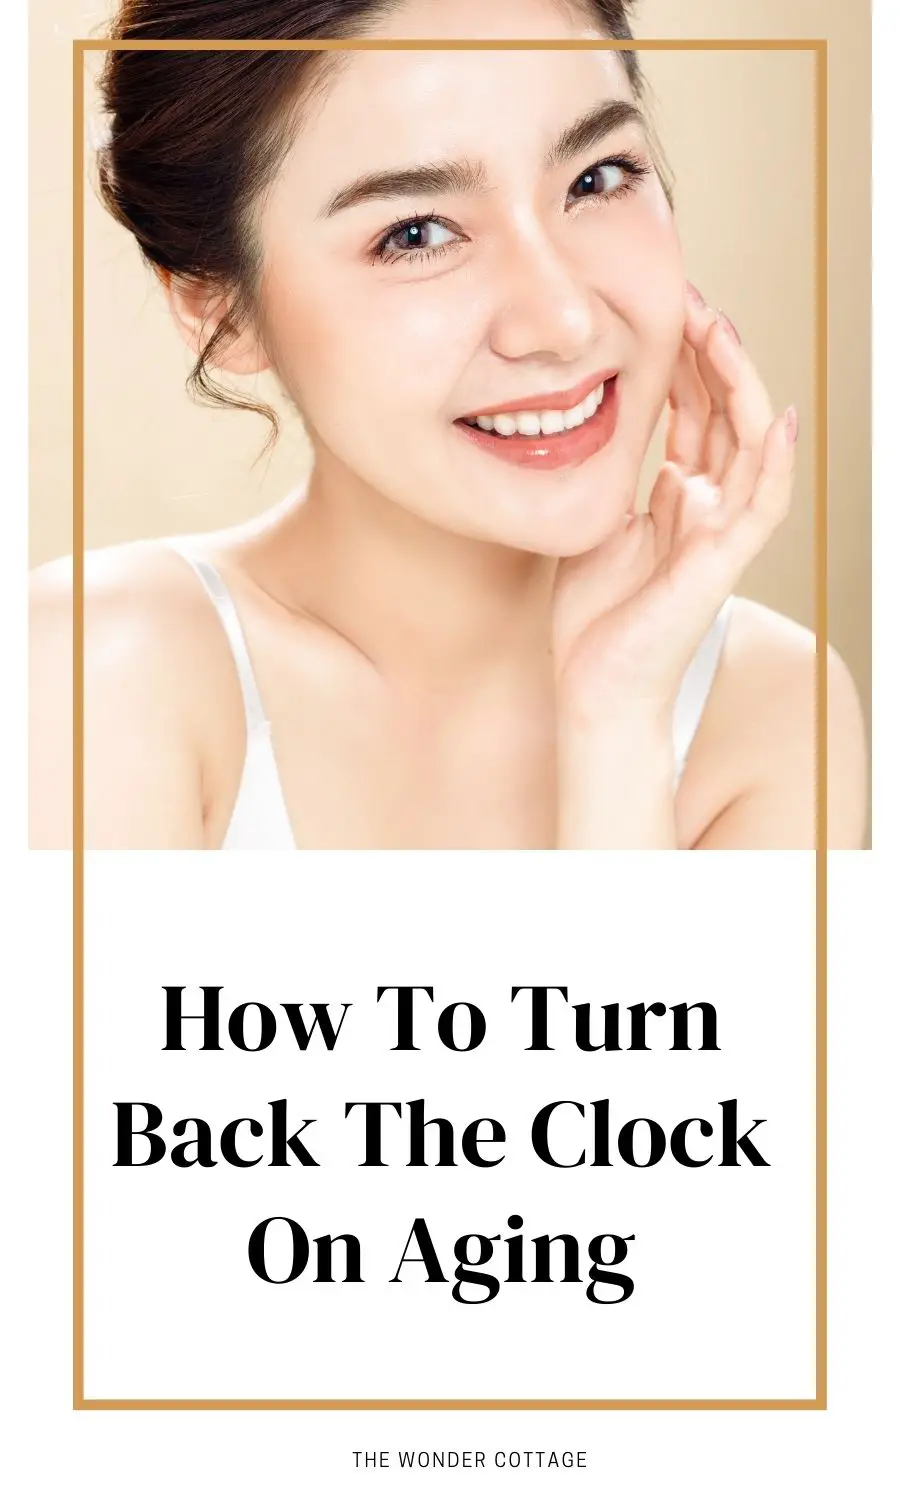 How To Turn Back The Clock On Aging